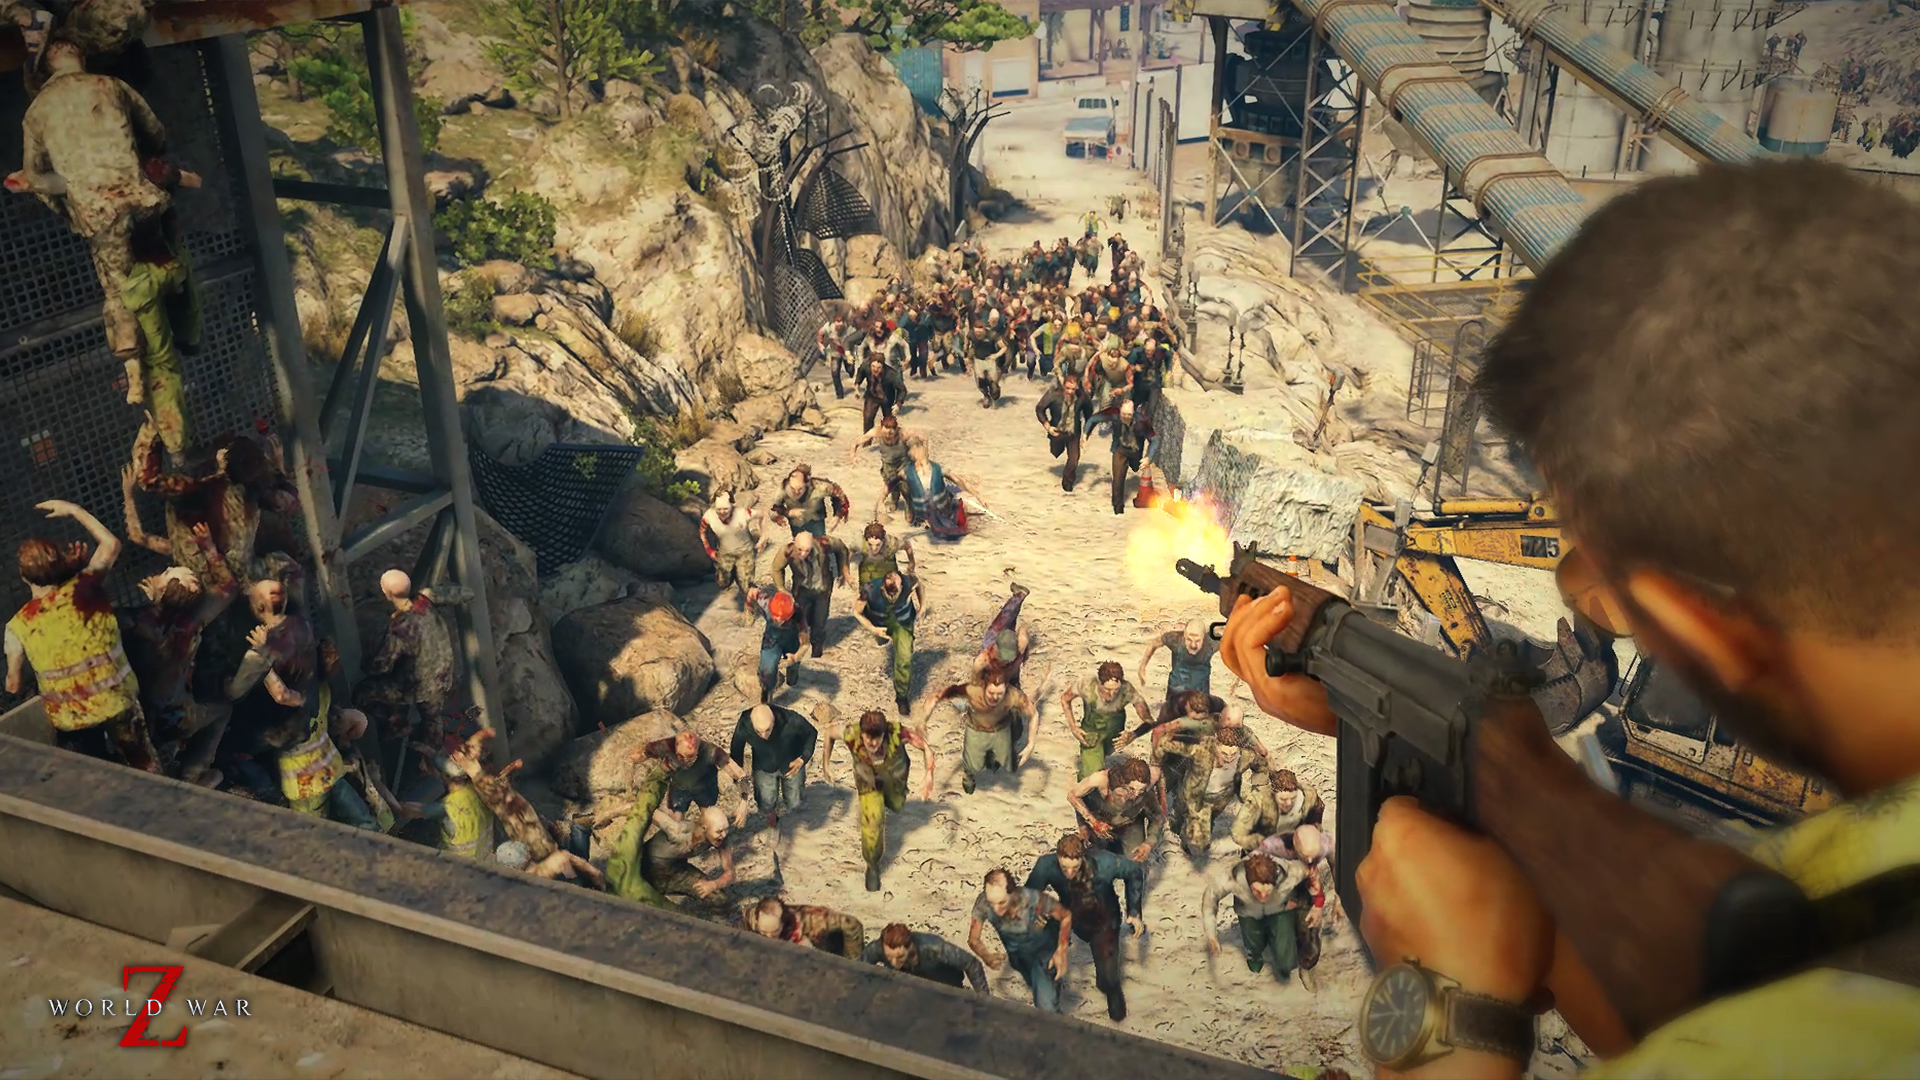 World War Z Finally Adds Full PvE Crossplay On All Editions